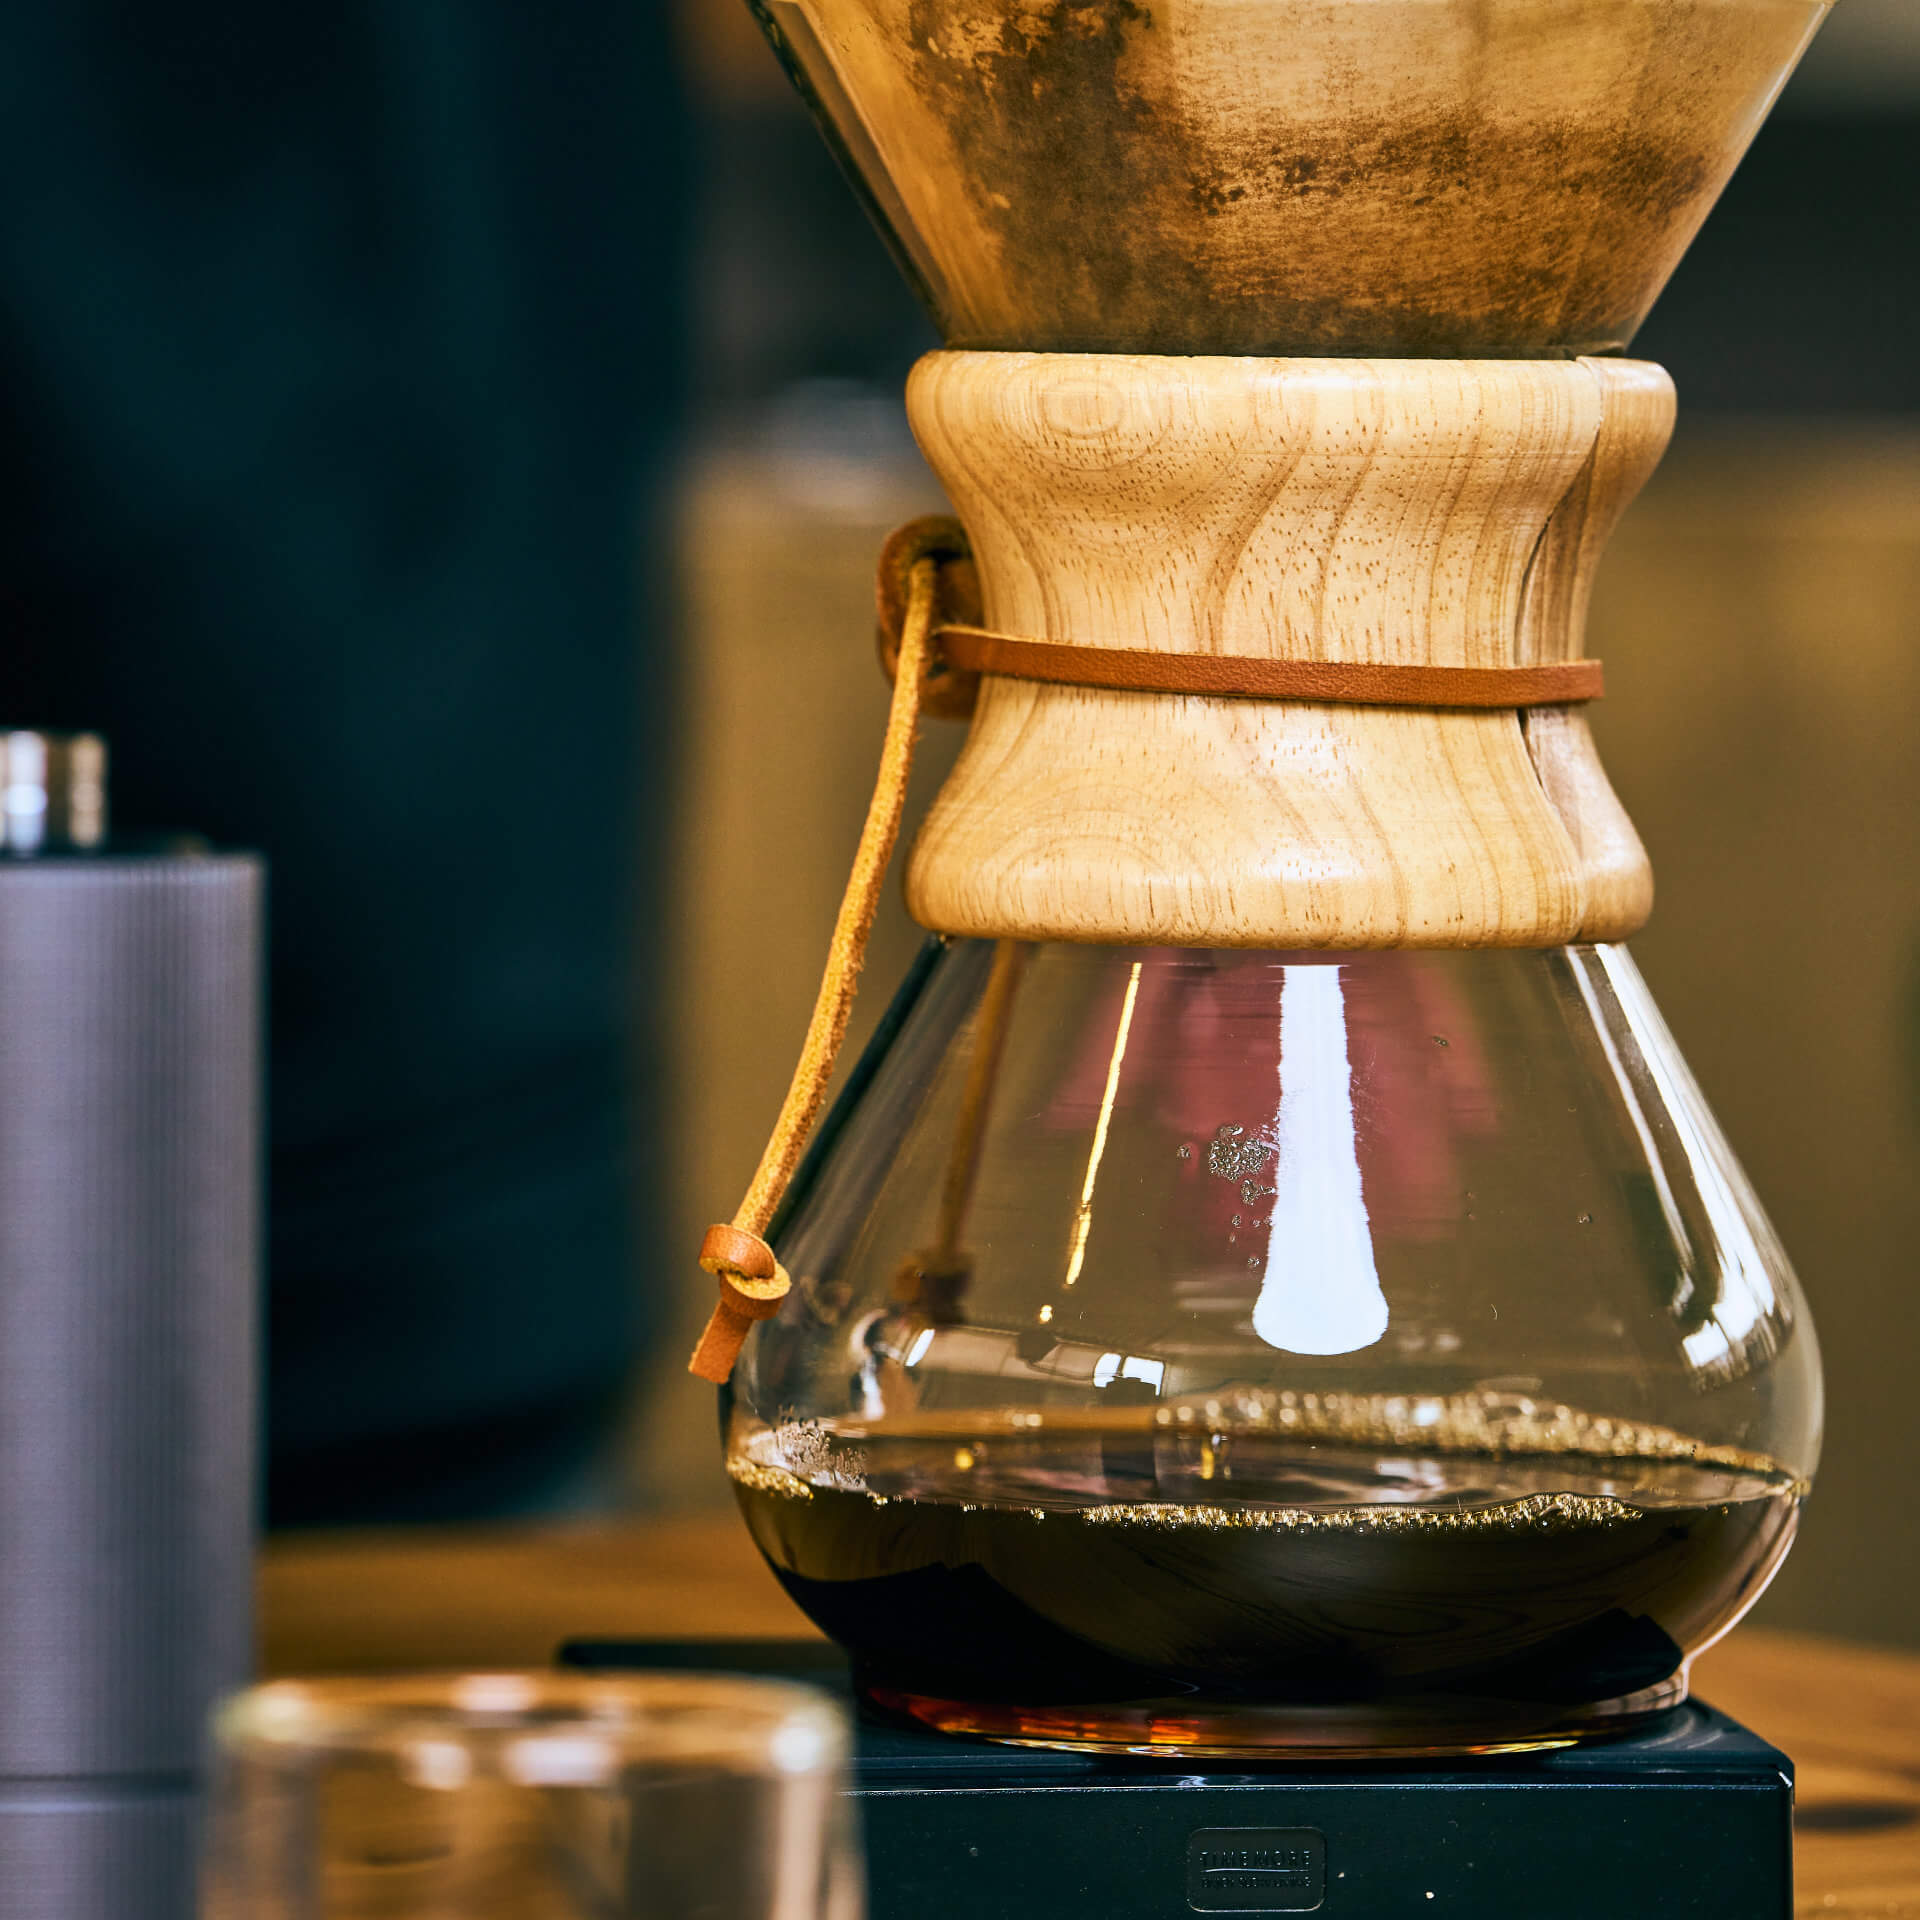 A photo of the chemex method of brewing